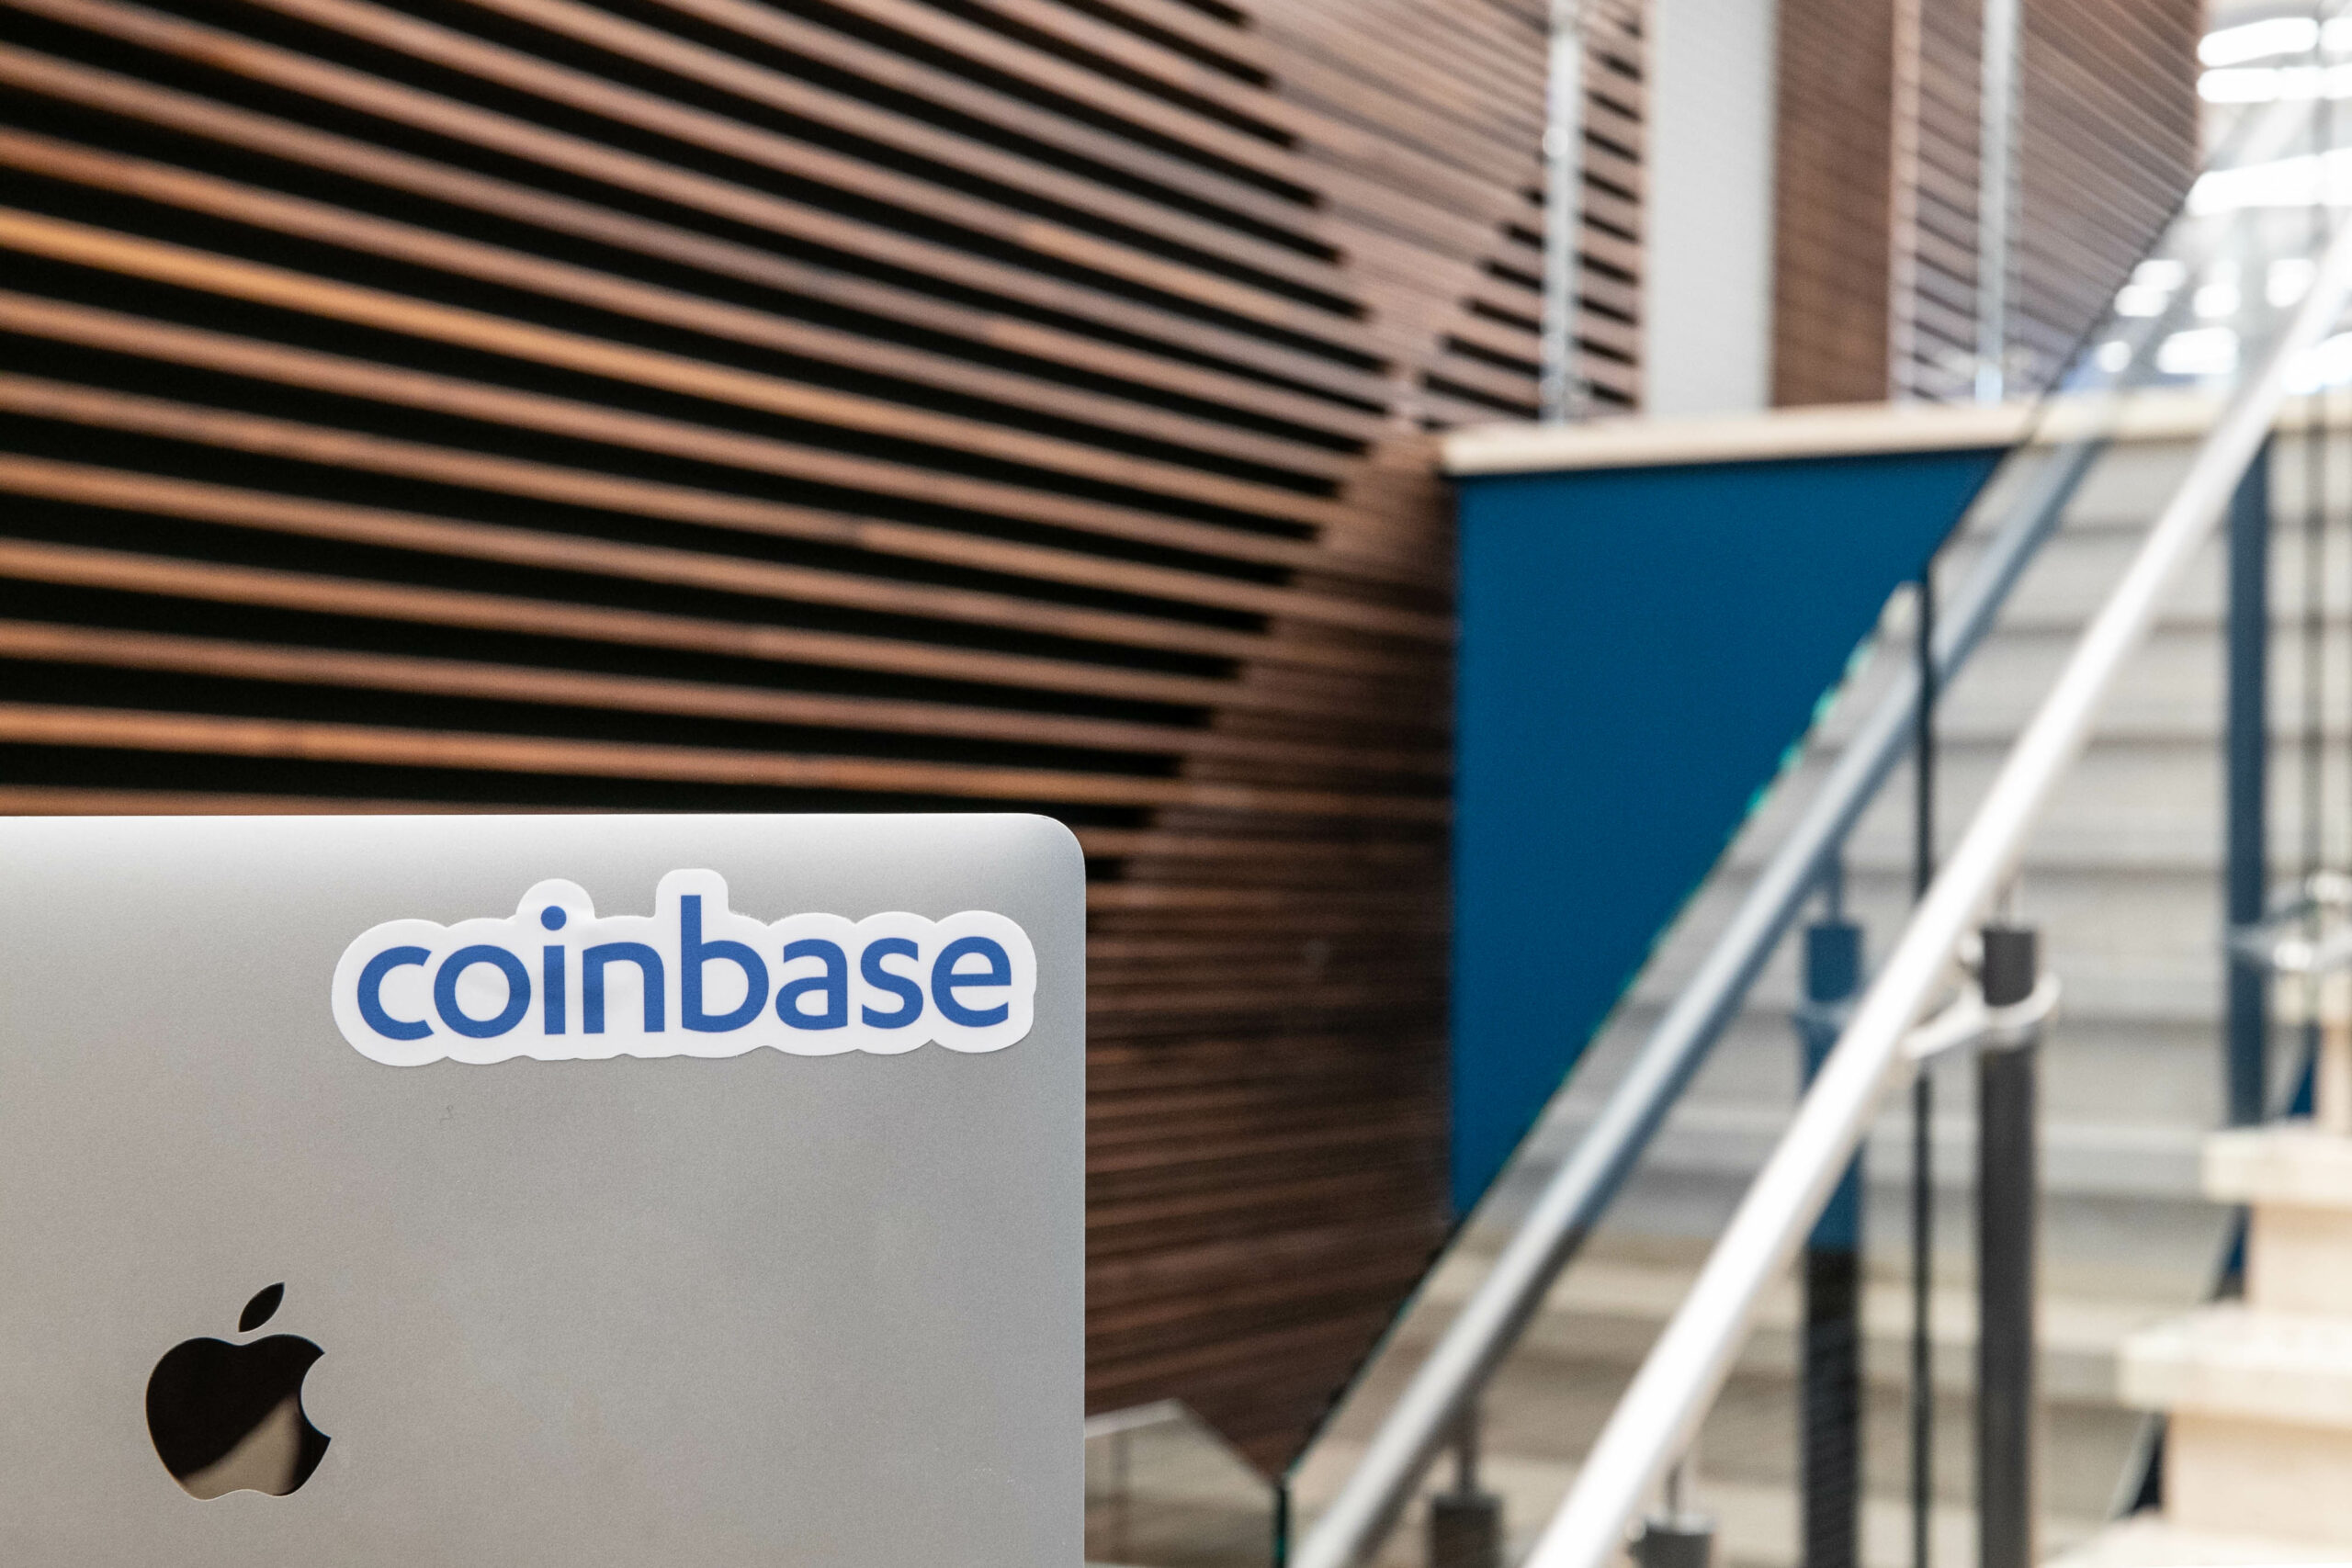 Coinbase CEO: “We Are Intending To Become People’s Primary Financial Accounts”